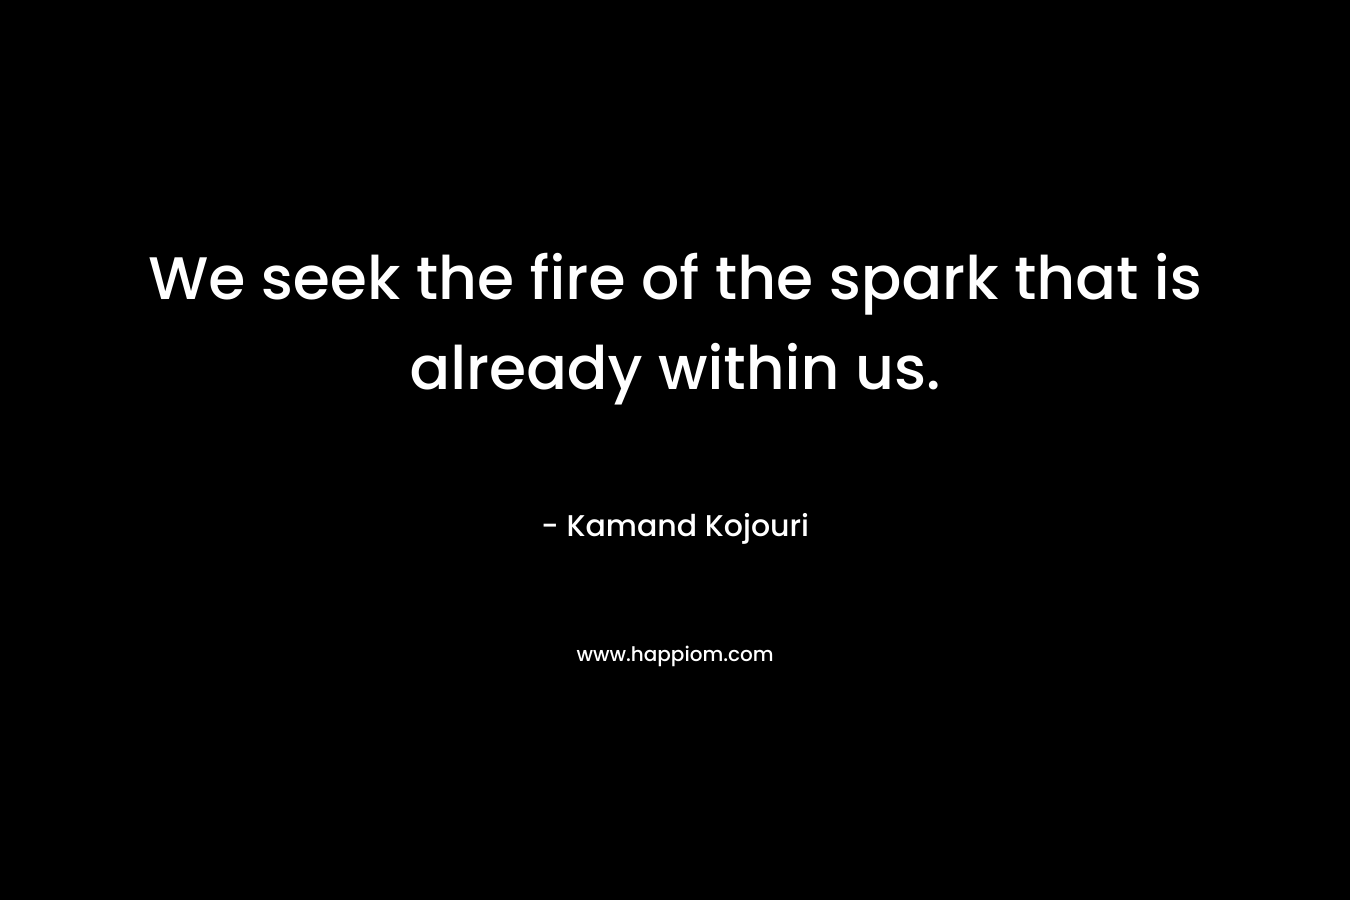 We seek the fire of the spark that is already within us. – Kamand Kojouri